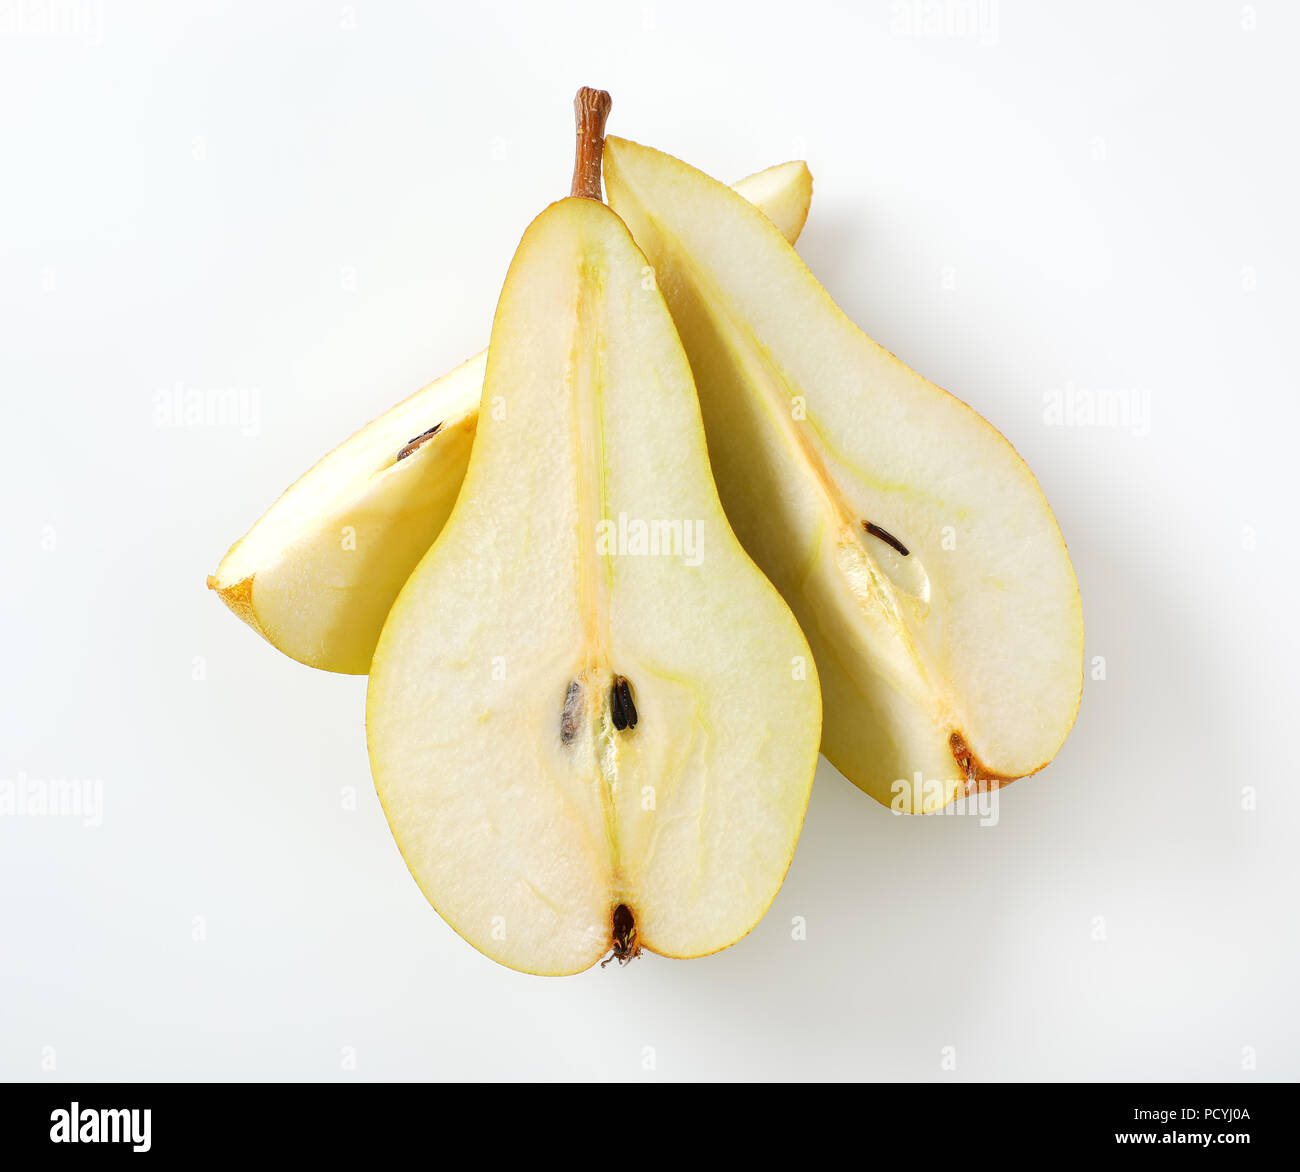 sliced yellow pear on white background Stock Photo